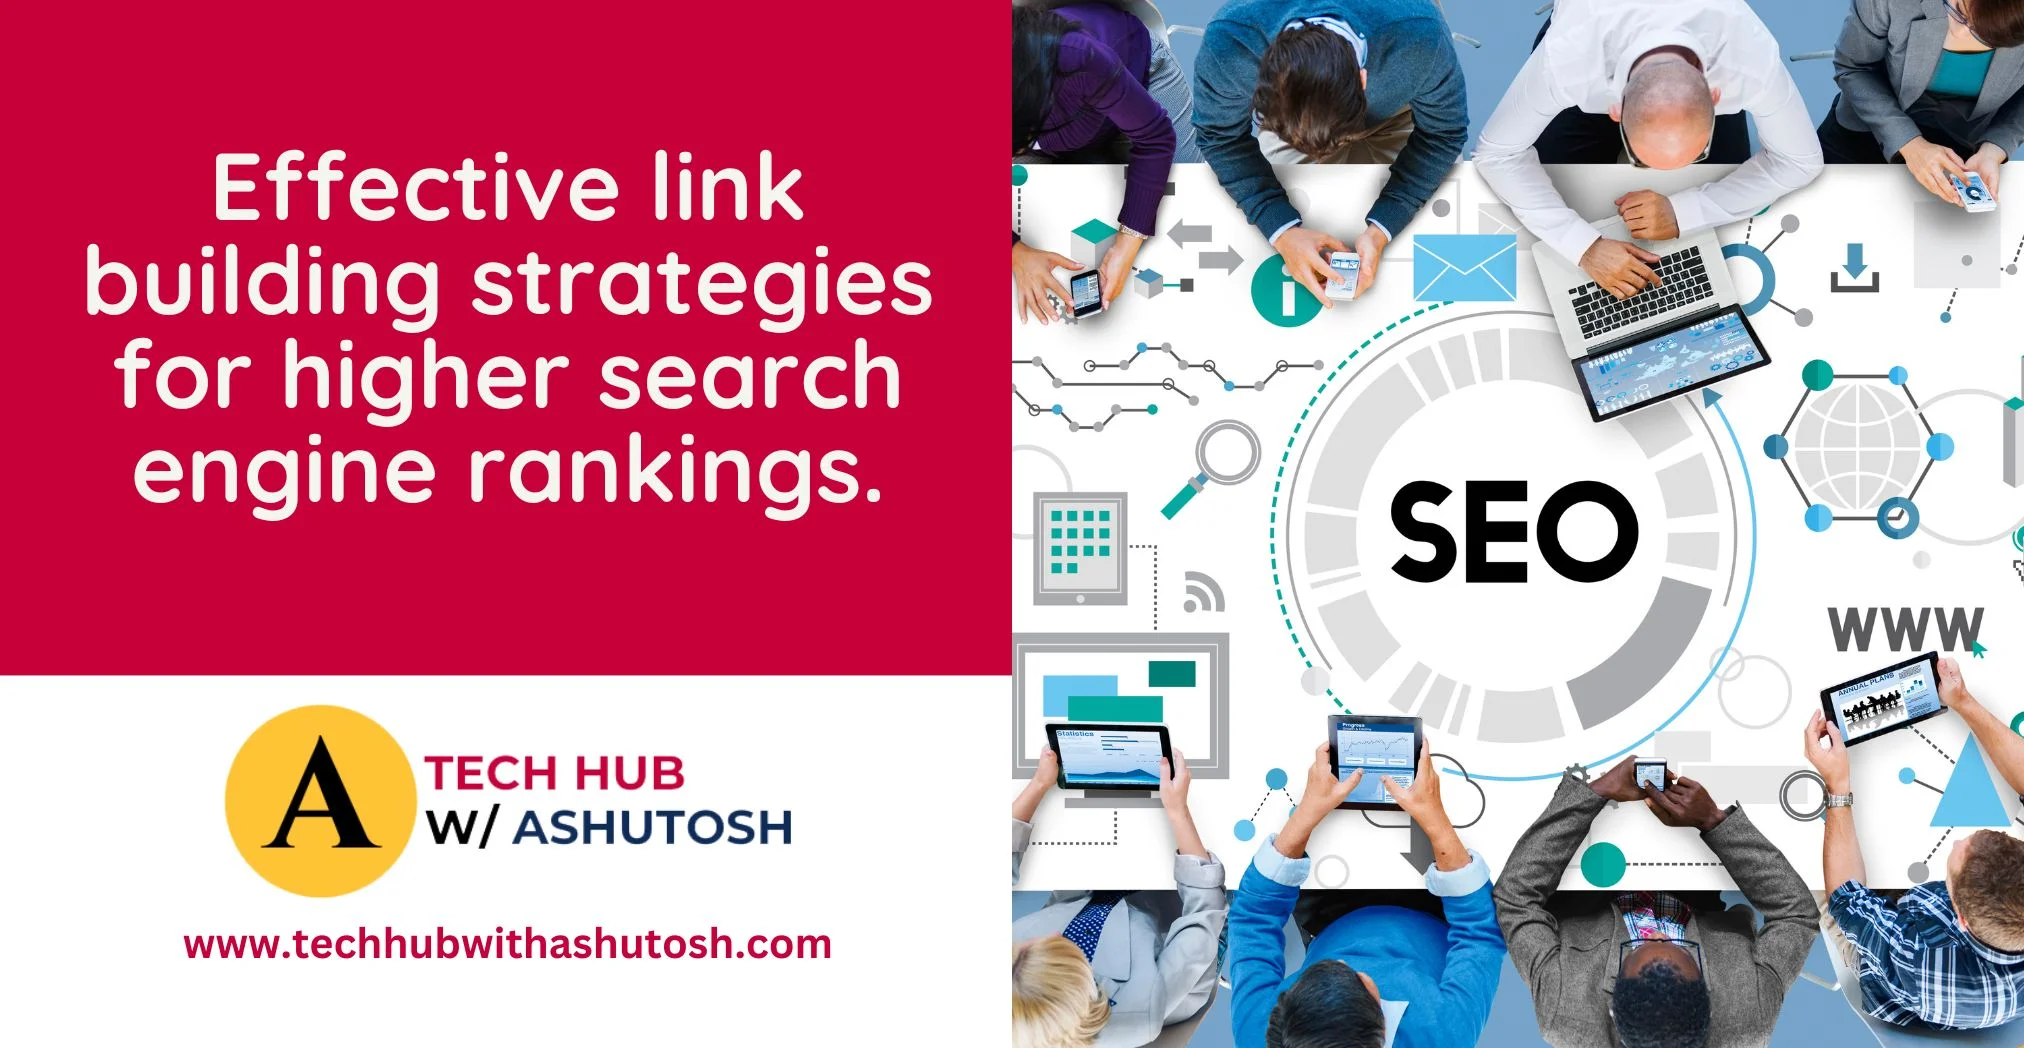 Effective link building strategies for higher search engine rankings by Tech Hub with Ashutosh